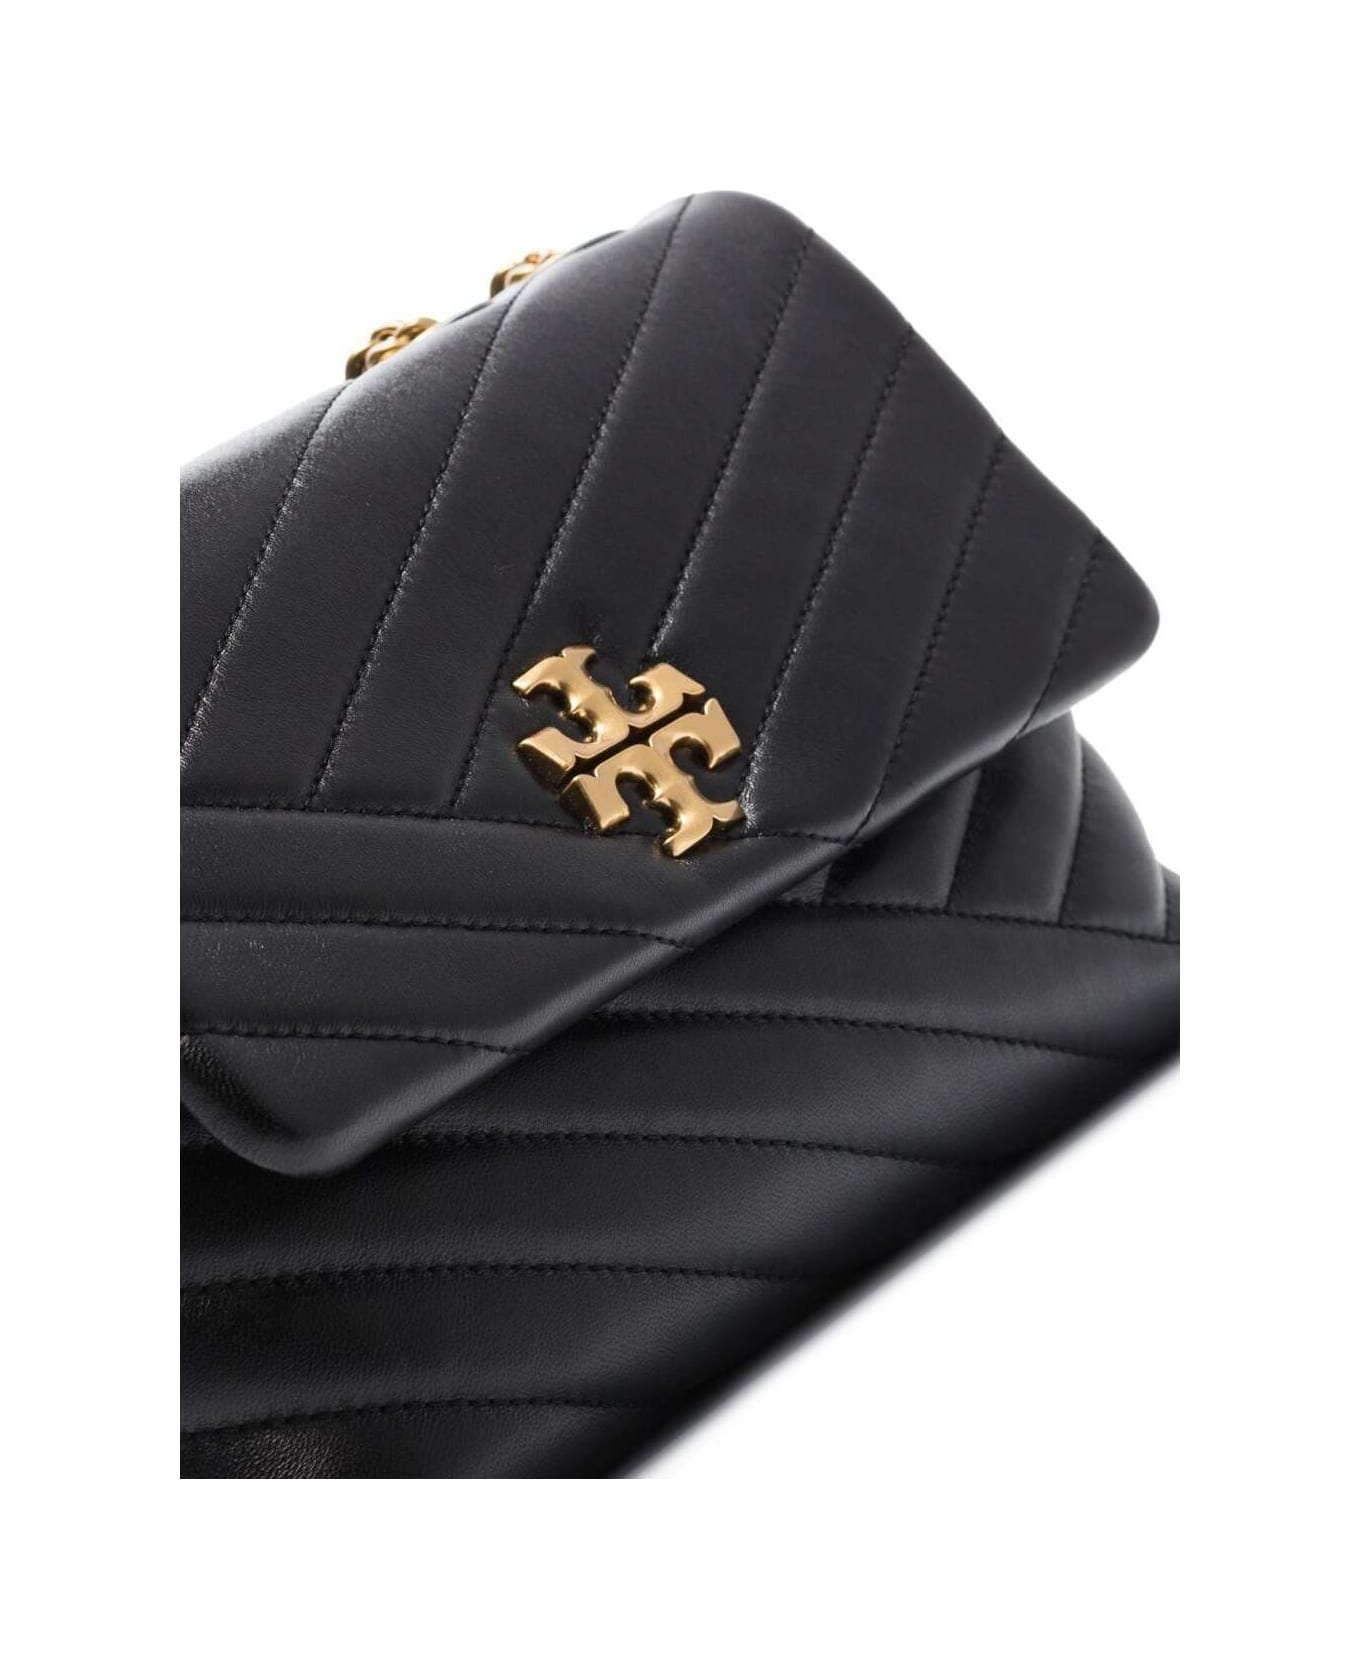 Tory Burch 'convertible Kira' Black Chain Shoulder Bag In Chevron-quilted Leather Woman Tory Burch - Black